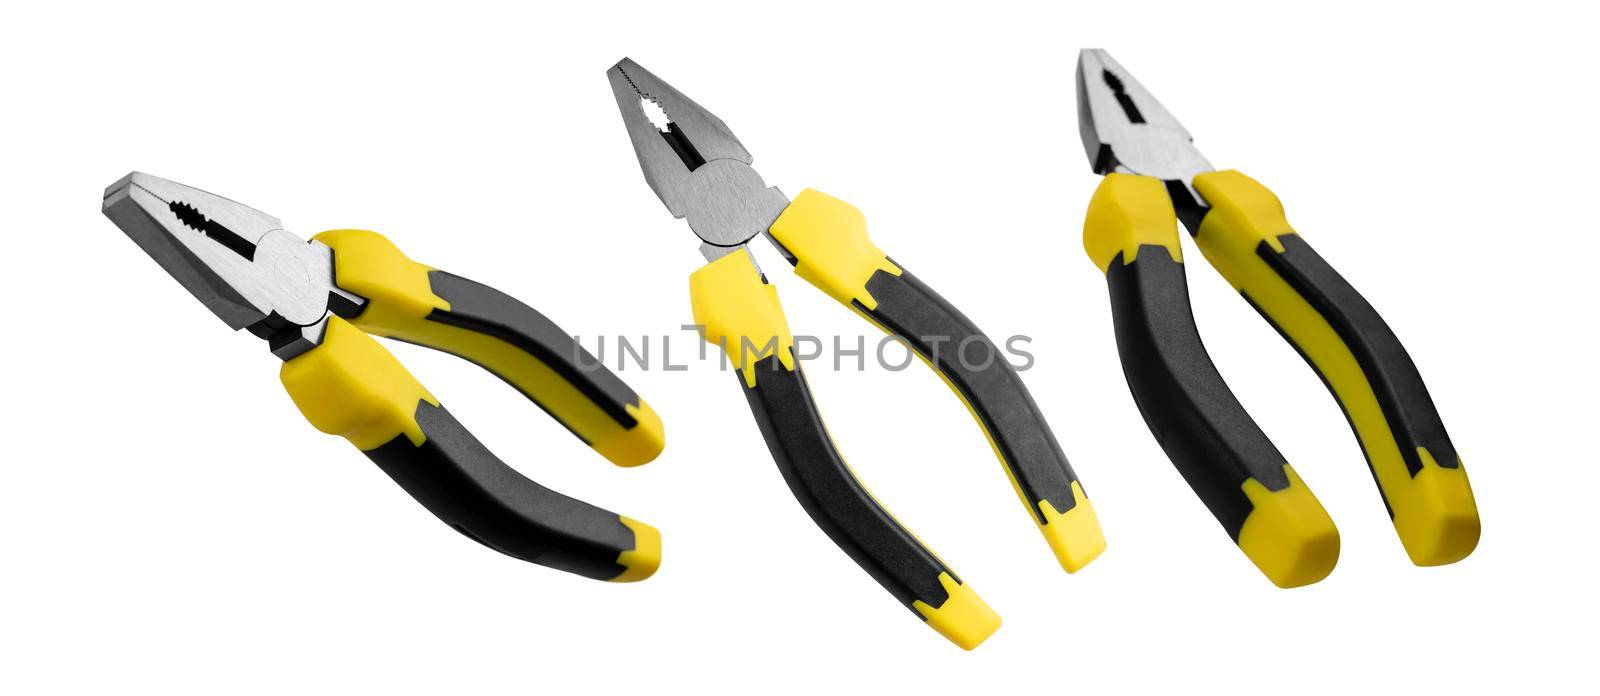 Pliers in different angles on a white background by butenkow